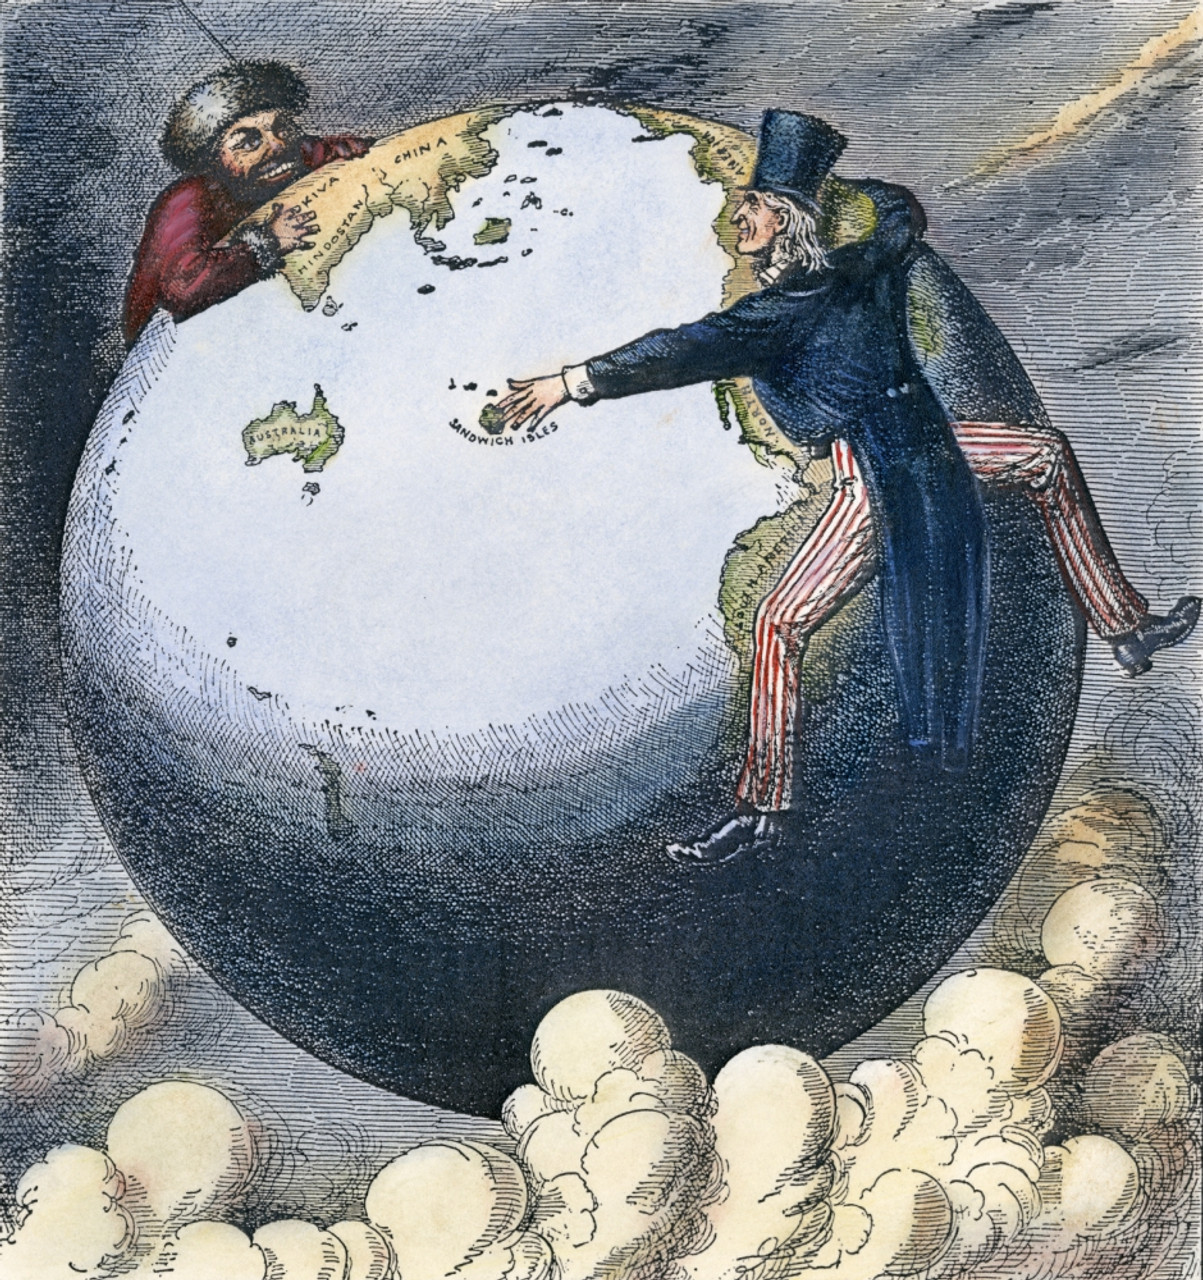 Cartoon: Imperialism, 1876. /N'The Two Young Giants, Ivan And Jonathan,  Reaching For Asia By Opposite Routes.' American Cartoon Occasioned By The  United States' Signing A Commercial Pact With Hawaii And Russia'S Expansion